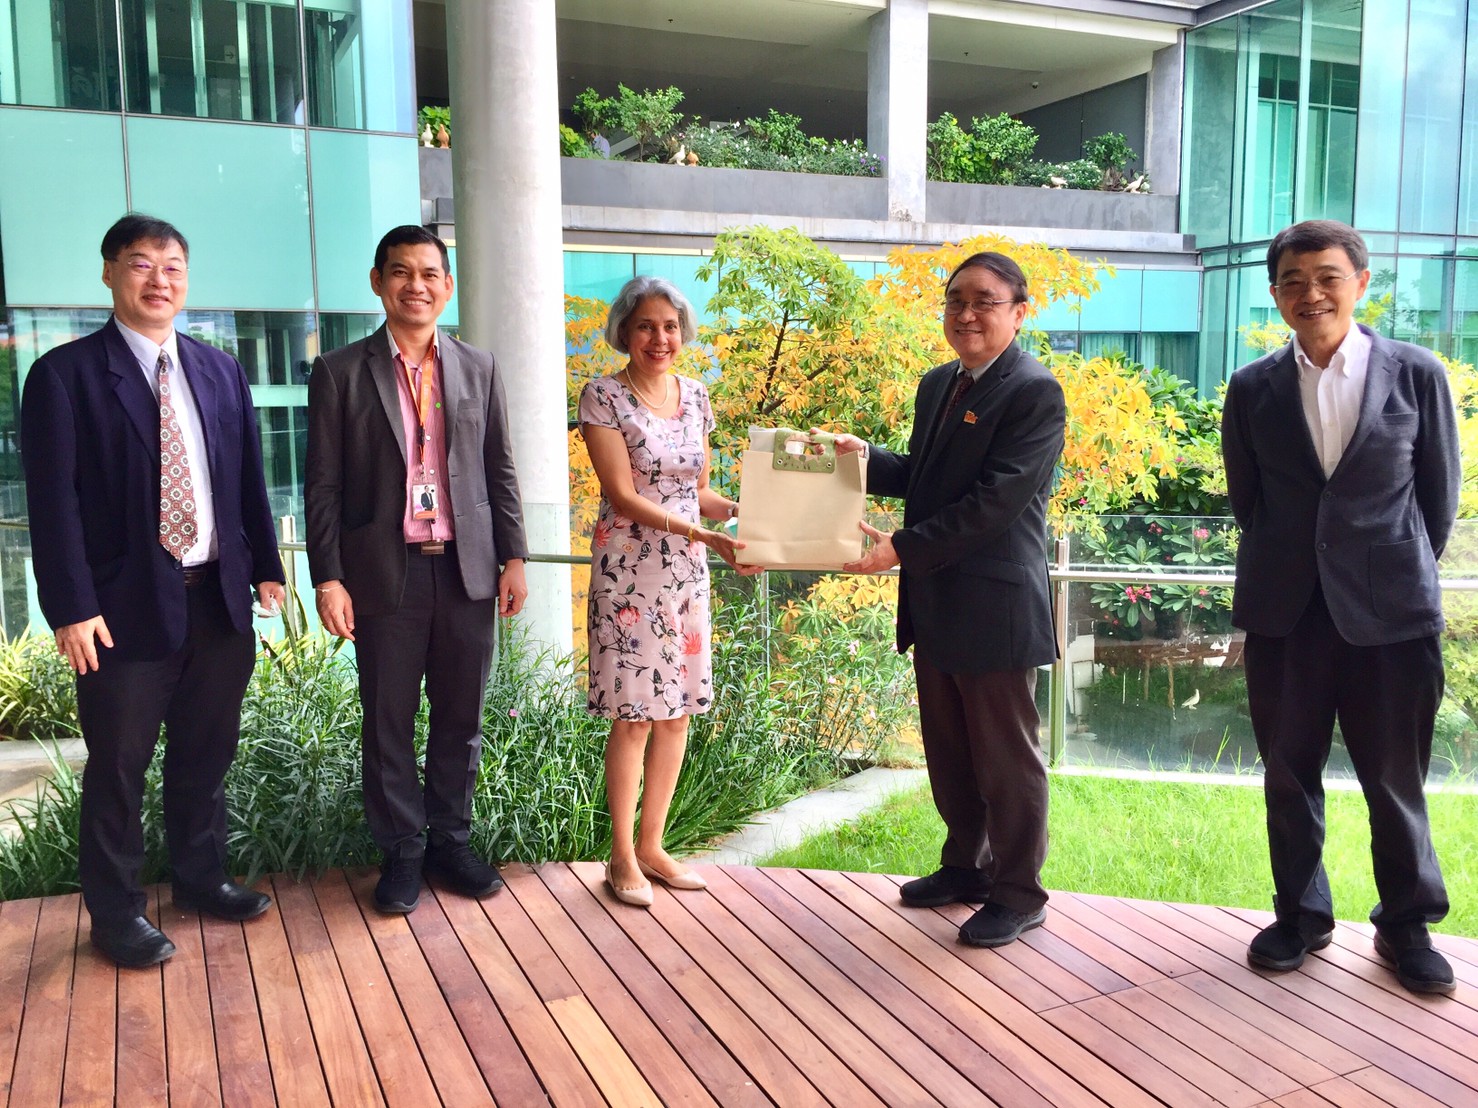 UN Resident Coordinator inThailand in official visit to ThaiHealth thaihealth